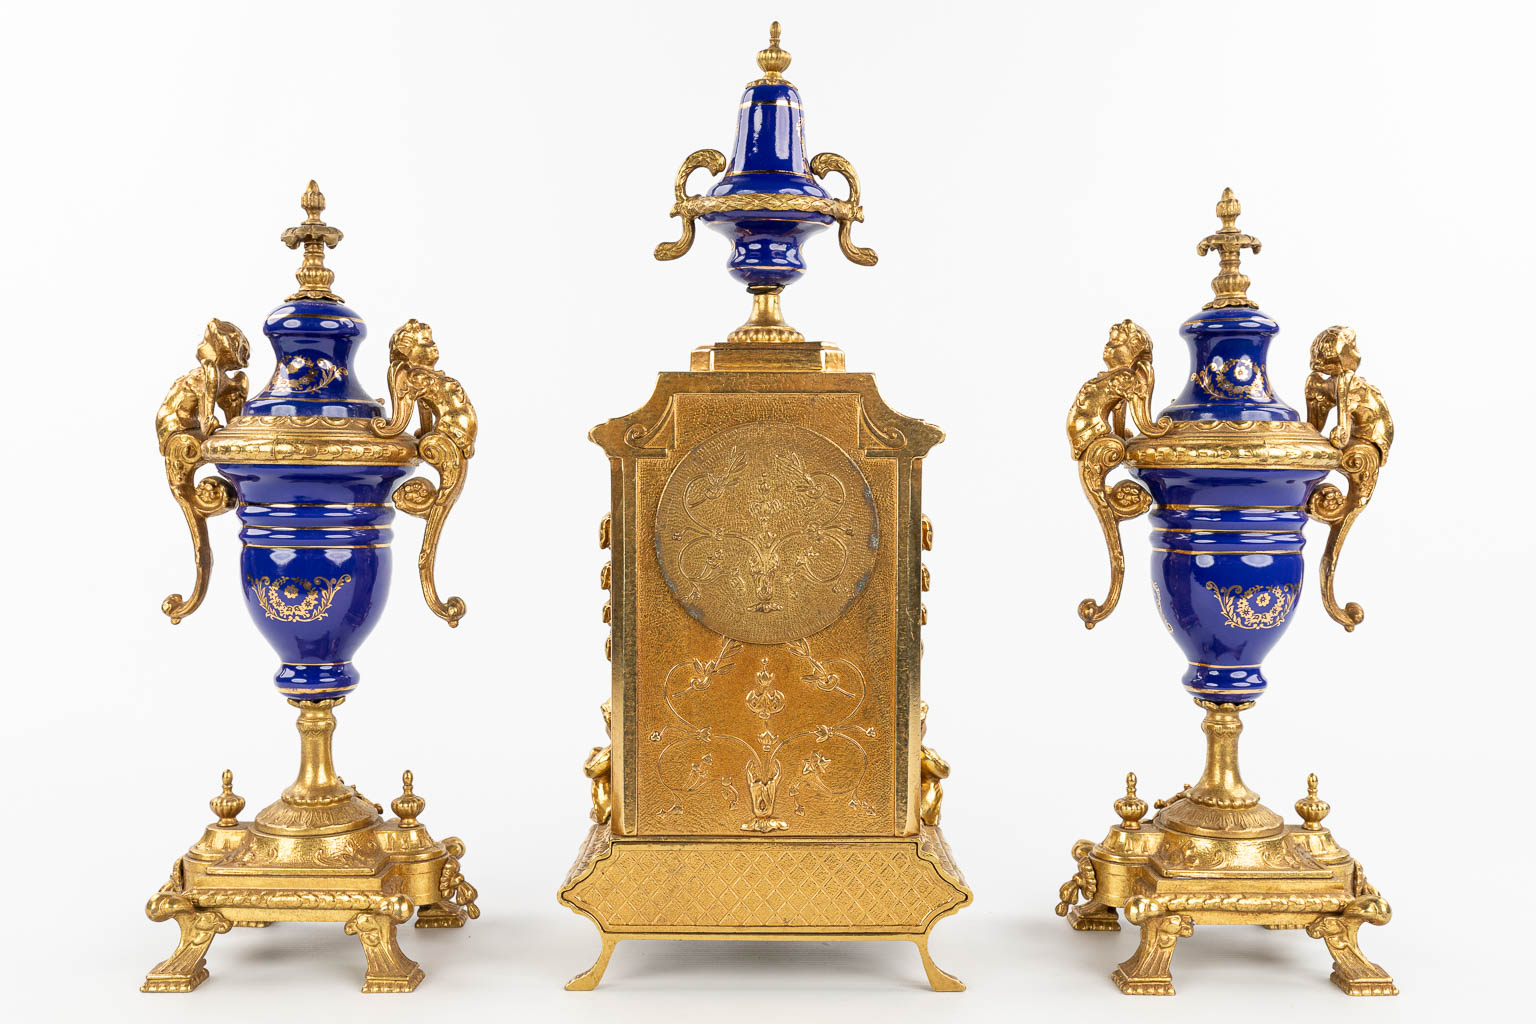 A three-piece mantle garniture clock made of bronze and porcelain and marked Imperial. (H:43cm)